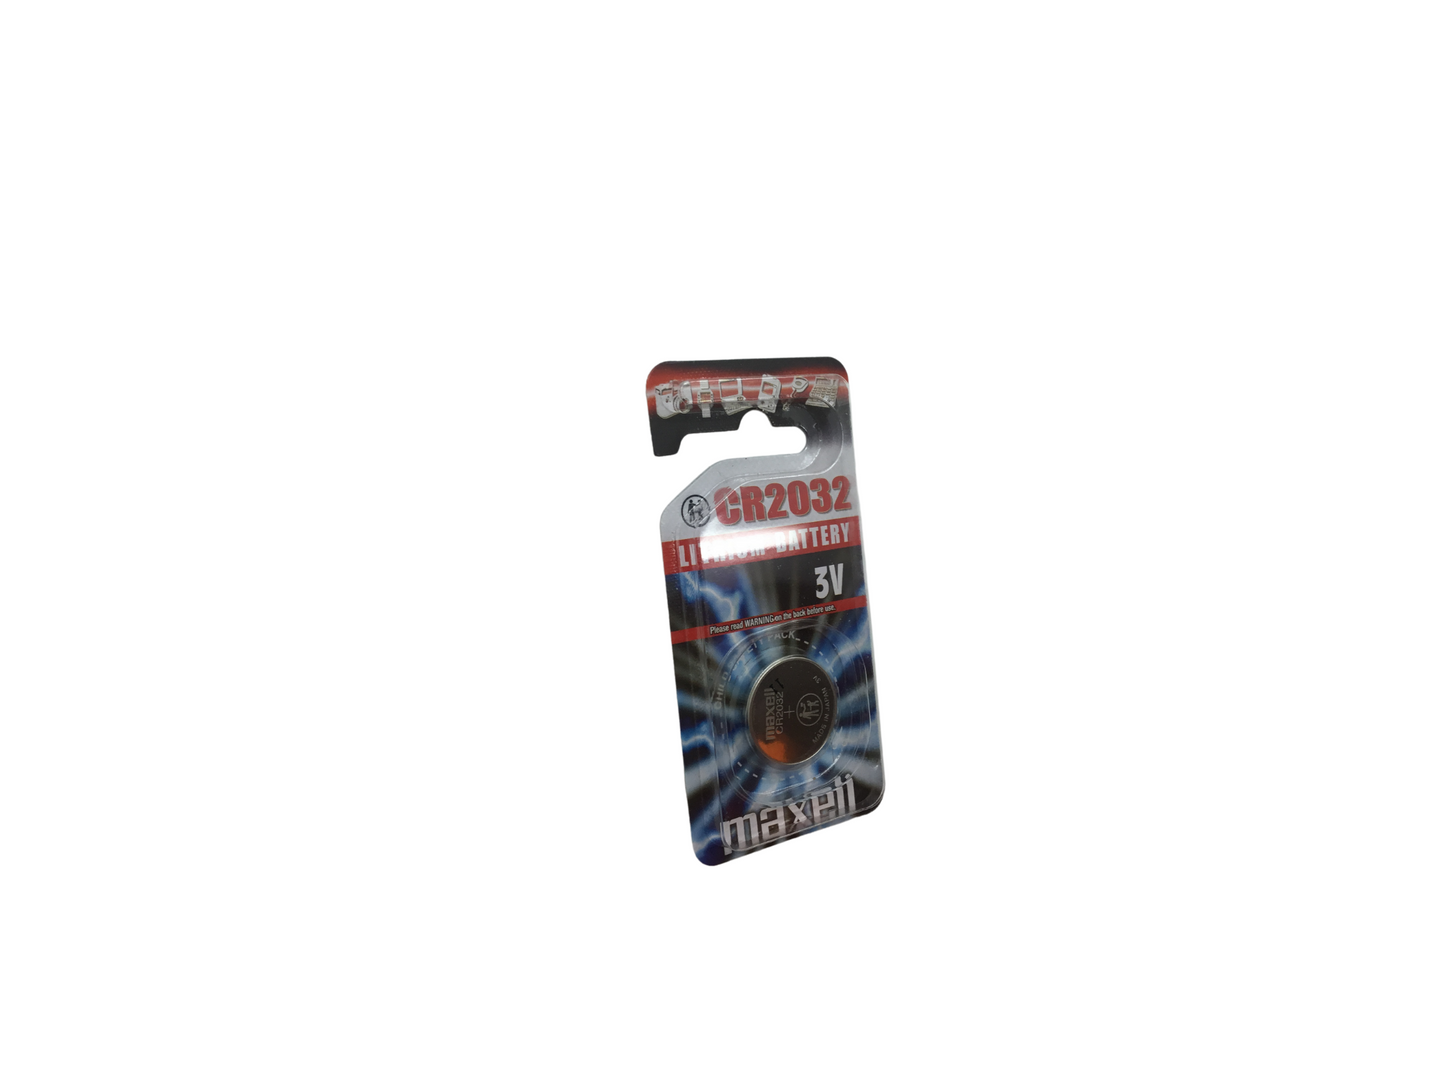 Maxell CR2032 Lithium Cell Battery